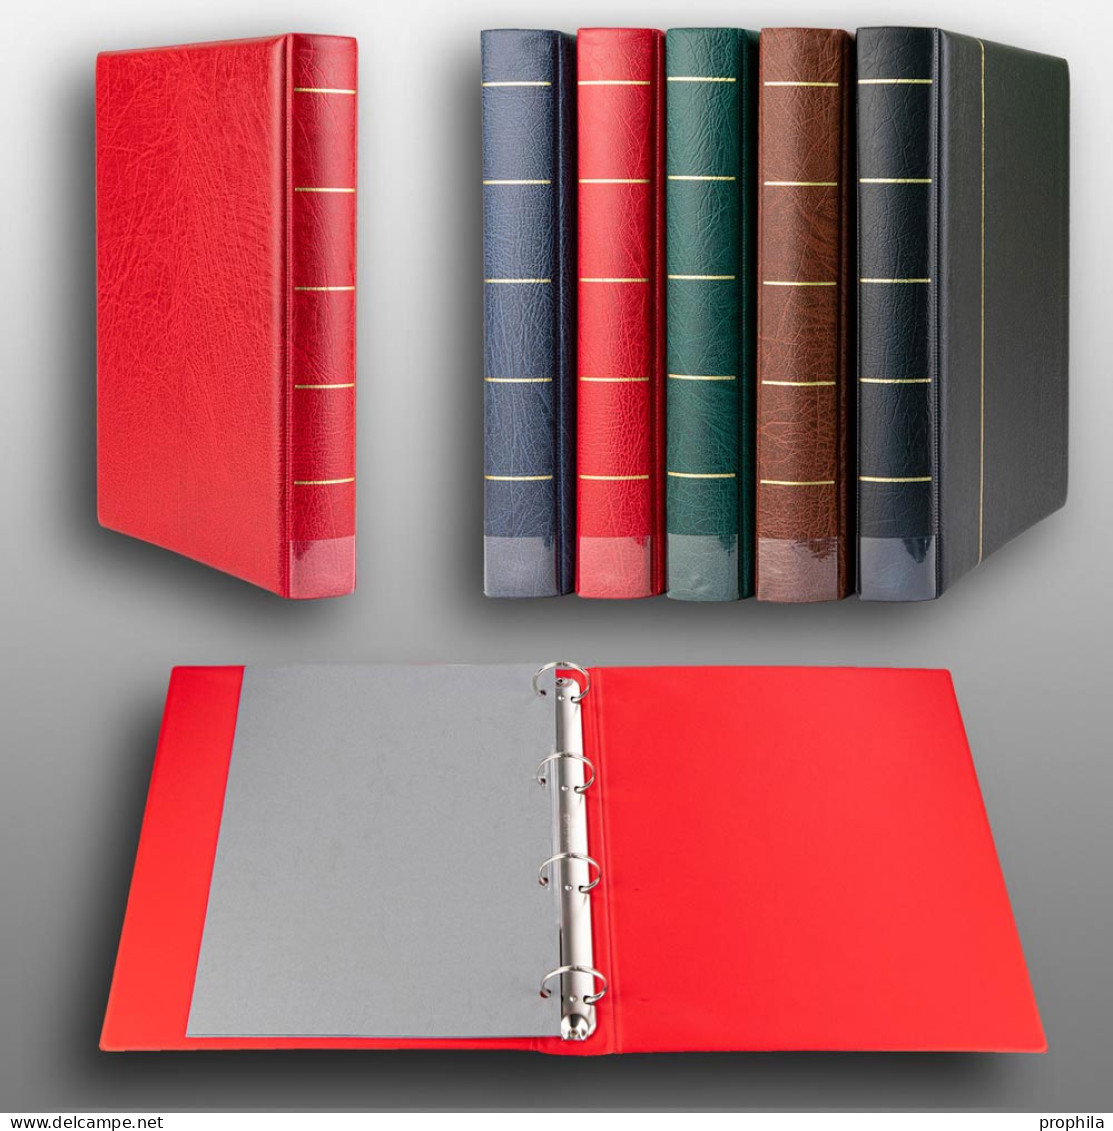 Prophila Maxi-Ringbinder De Luxe Rot - Large Format, Black Pages